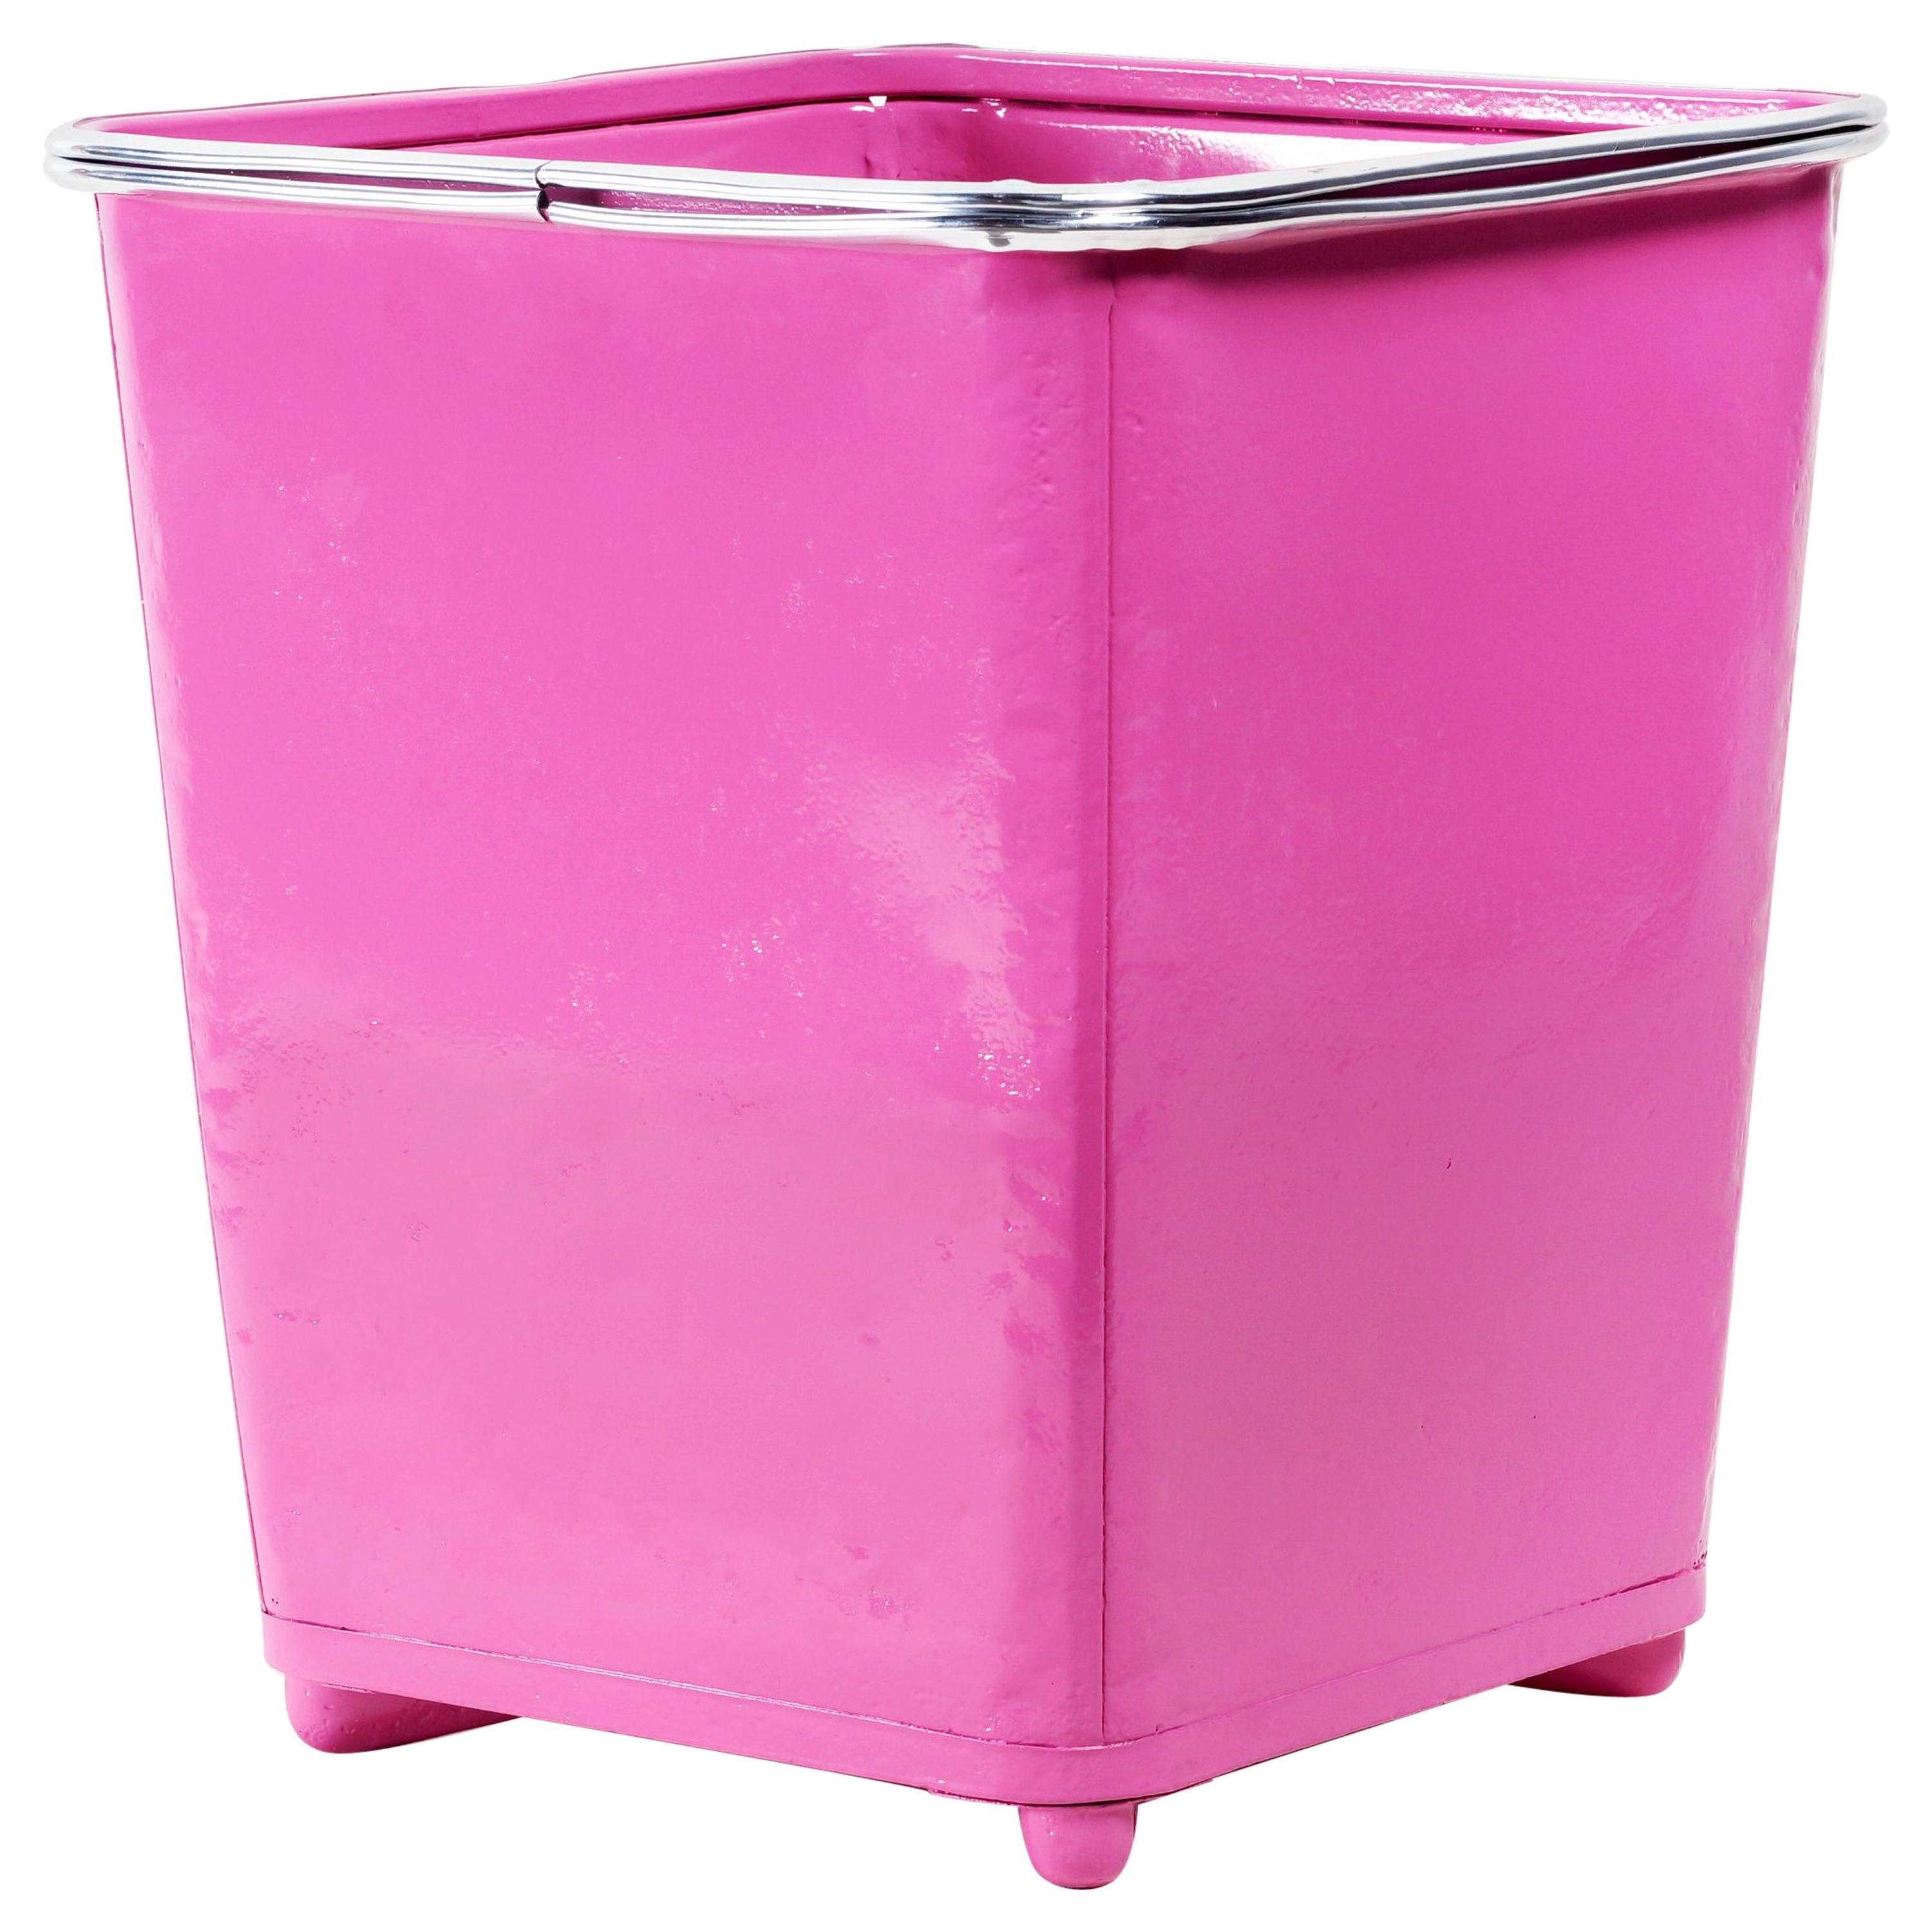 Machine Age Steel Trash Can with Aluminium Trim, Refinished in Pink